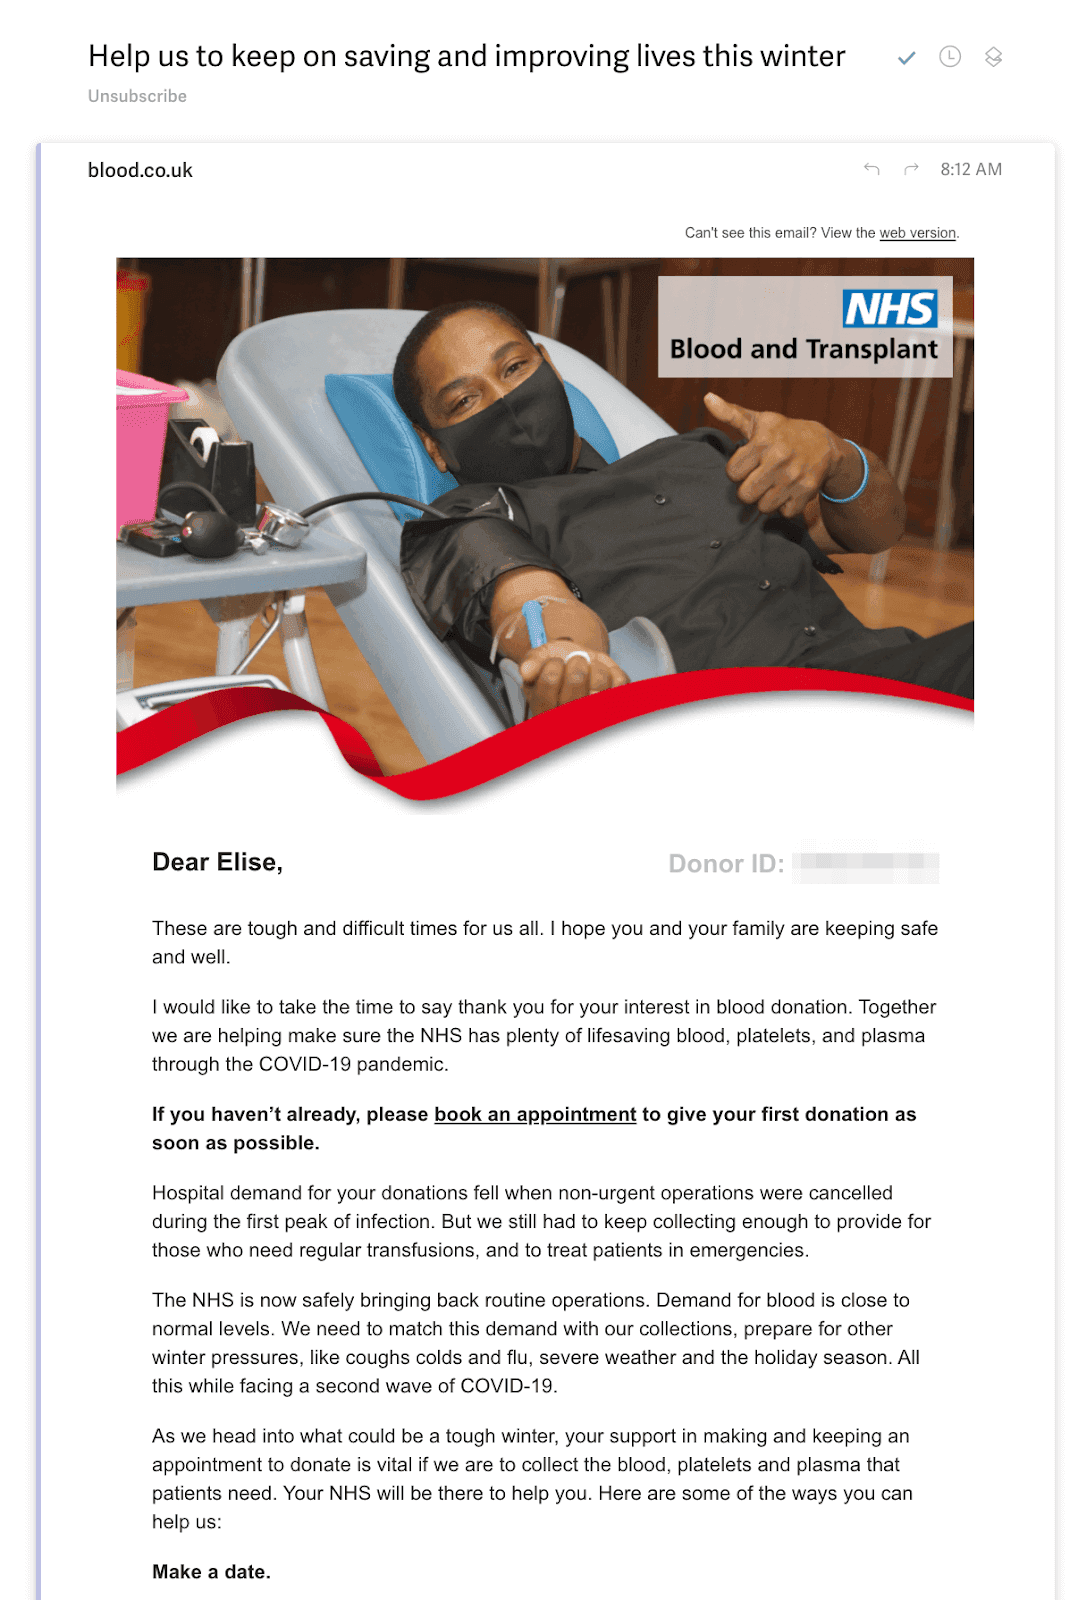 Email drip campaign from blood.co.uk